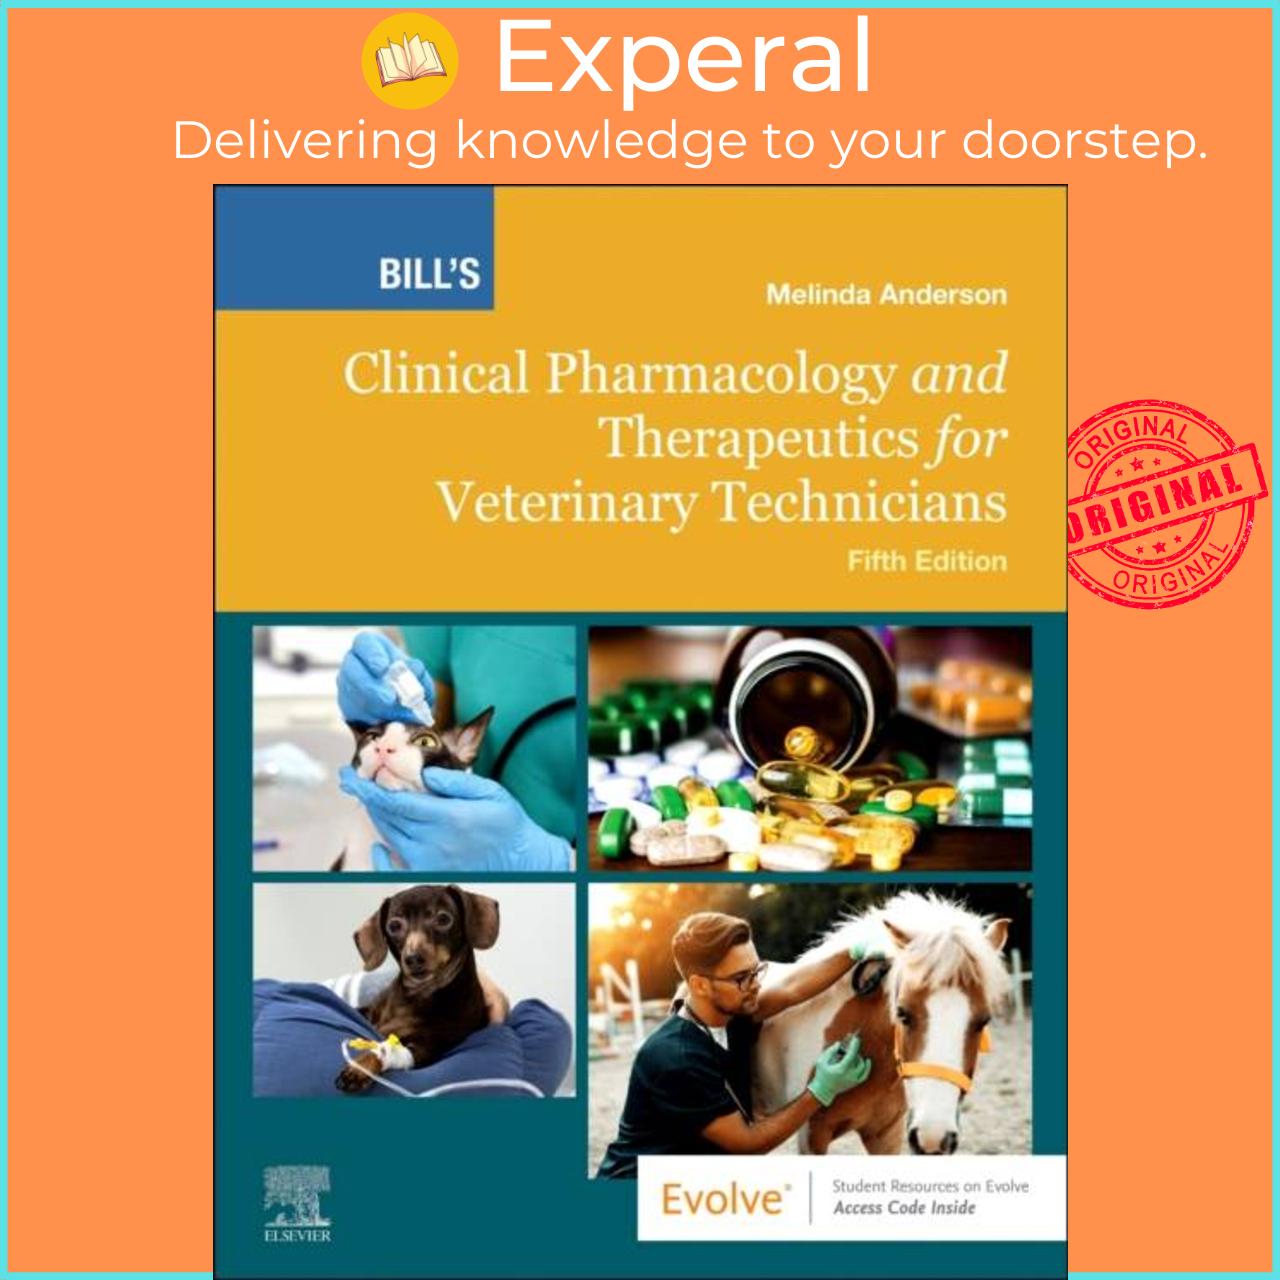 Sách - Bill's Clinical Pharmacology and Therapeutics for Veterinary Technici by Melinda Anderson (UK edition, paperback)